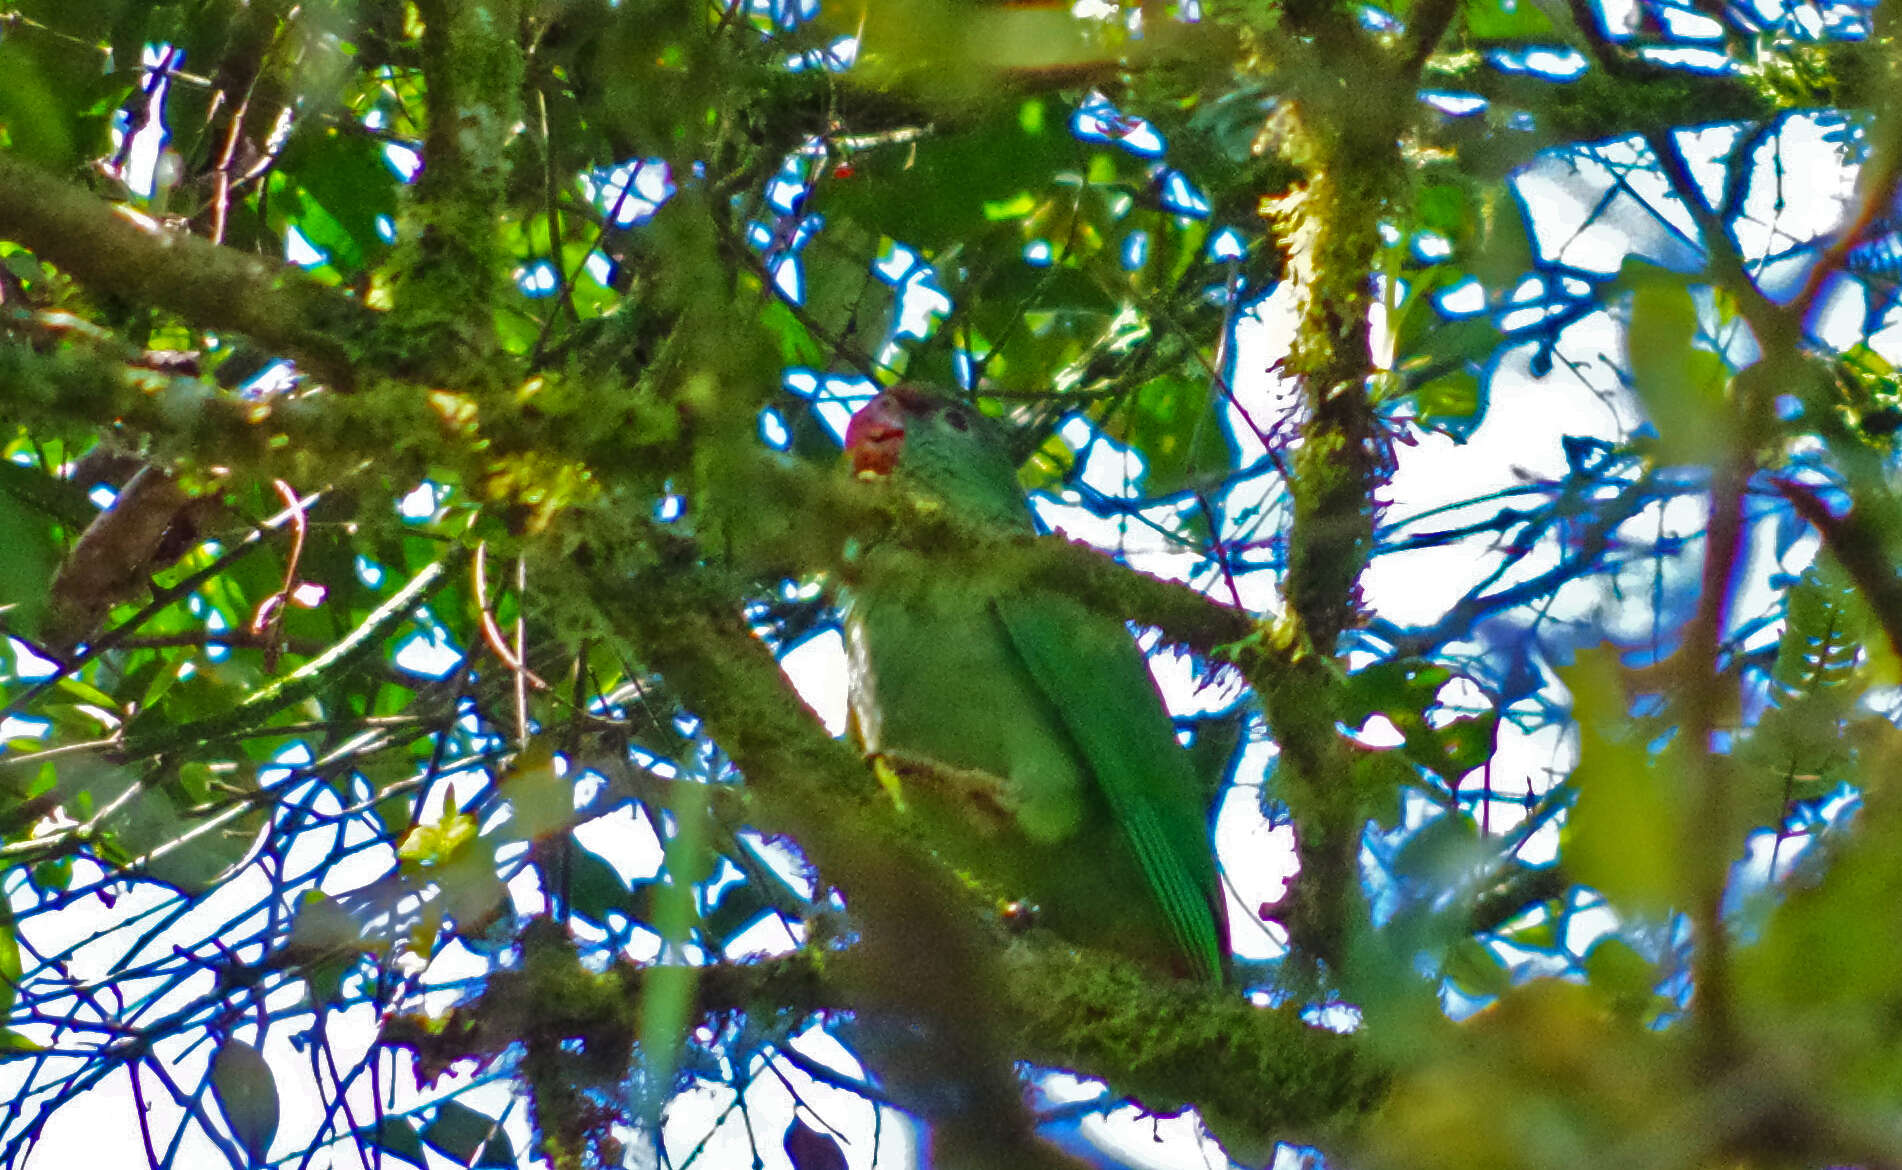 Image of Red-billed Parrot